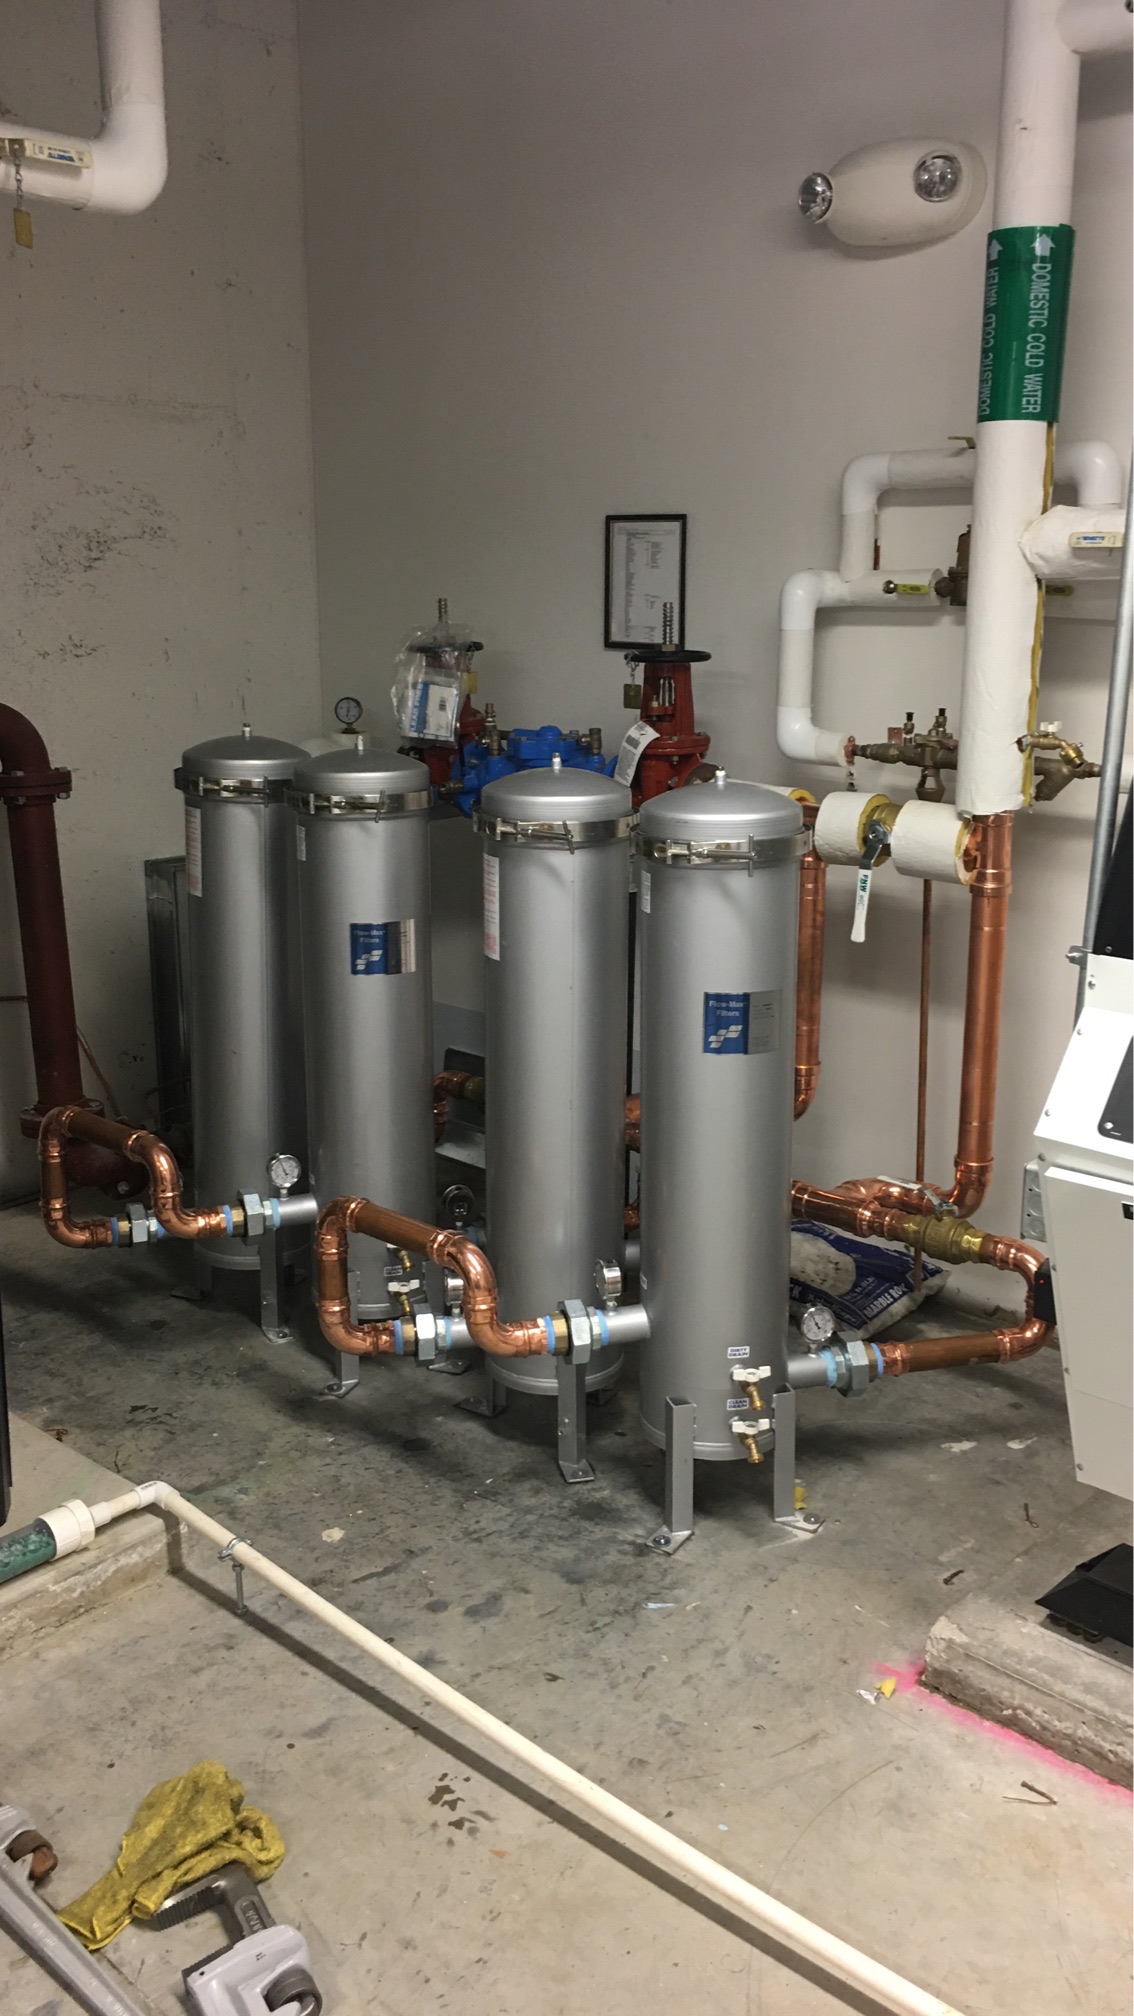 Large capacity sediment and activated carbon filters for this new construction, large home to remove heavy sediment as well as Trihalomethanes reported in the water supply.